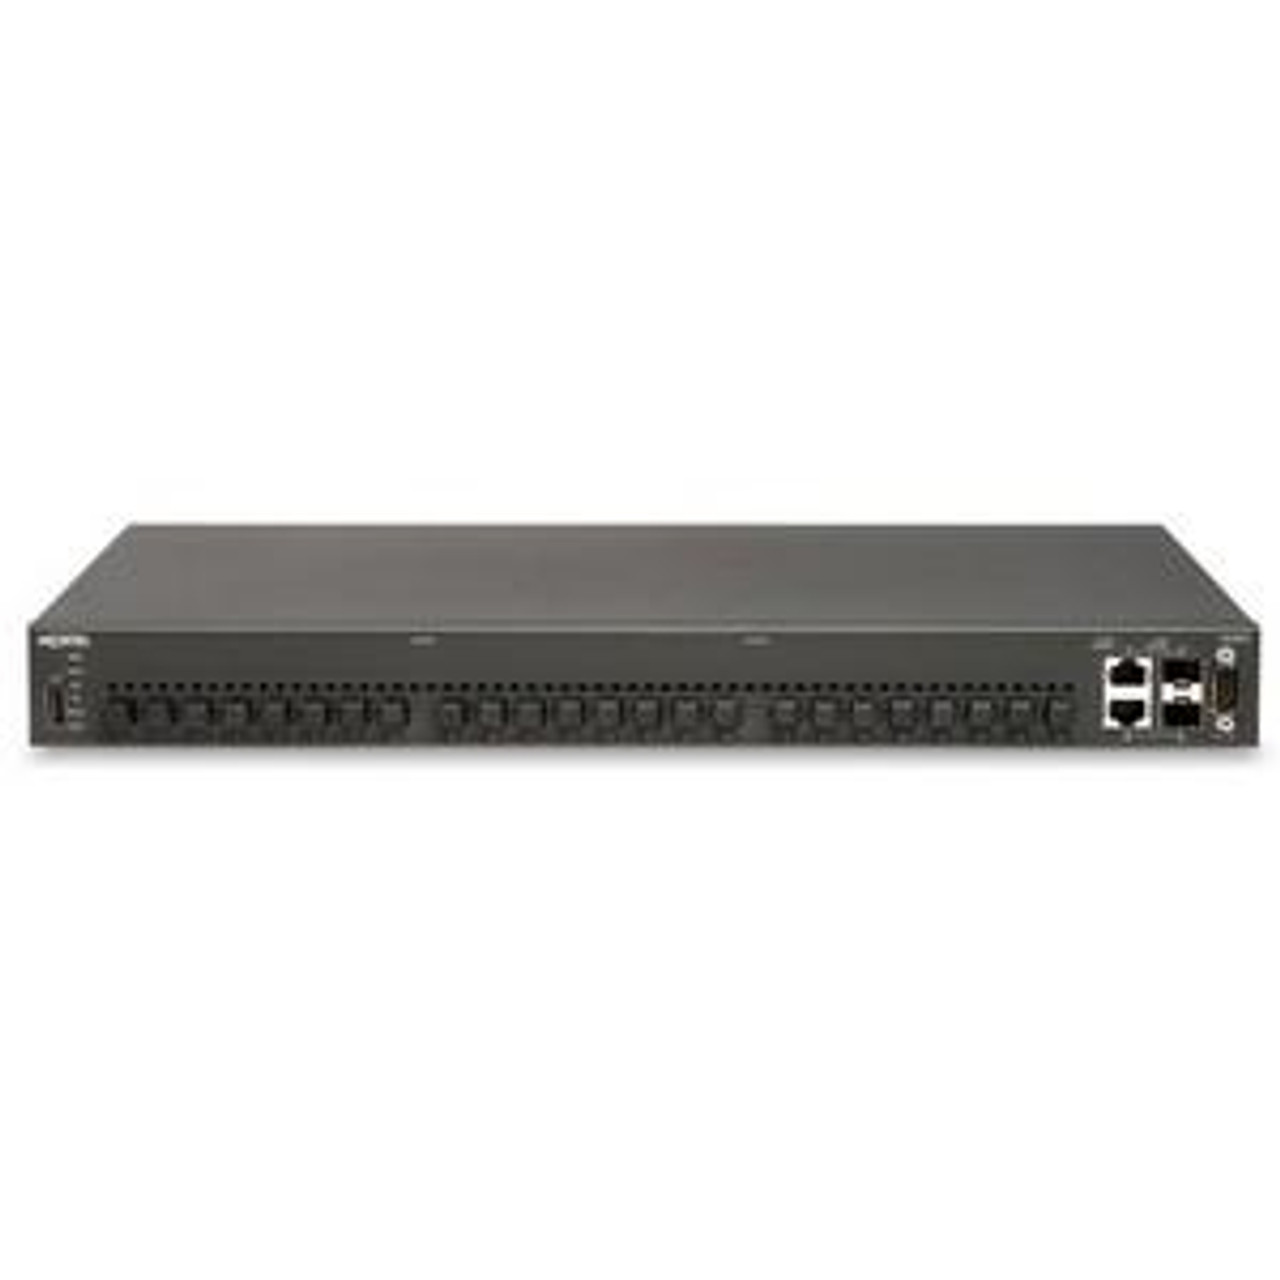 AL4500A01-E6GS Nortel Fast Ethernet Routing External Switch 4526FX with 24 100BaseFX Ports plus 2 combo 10/100/1000 SFP Ports HiStack Ports and RPS Slot